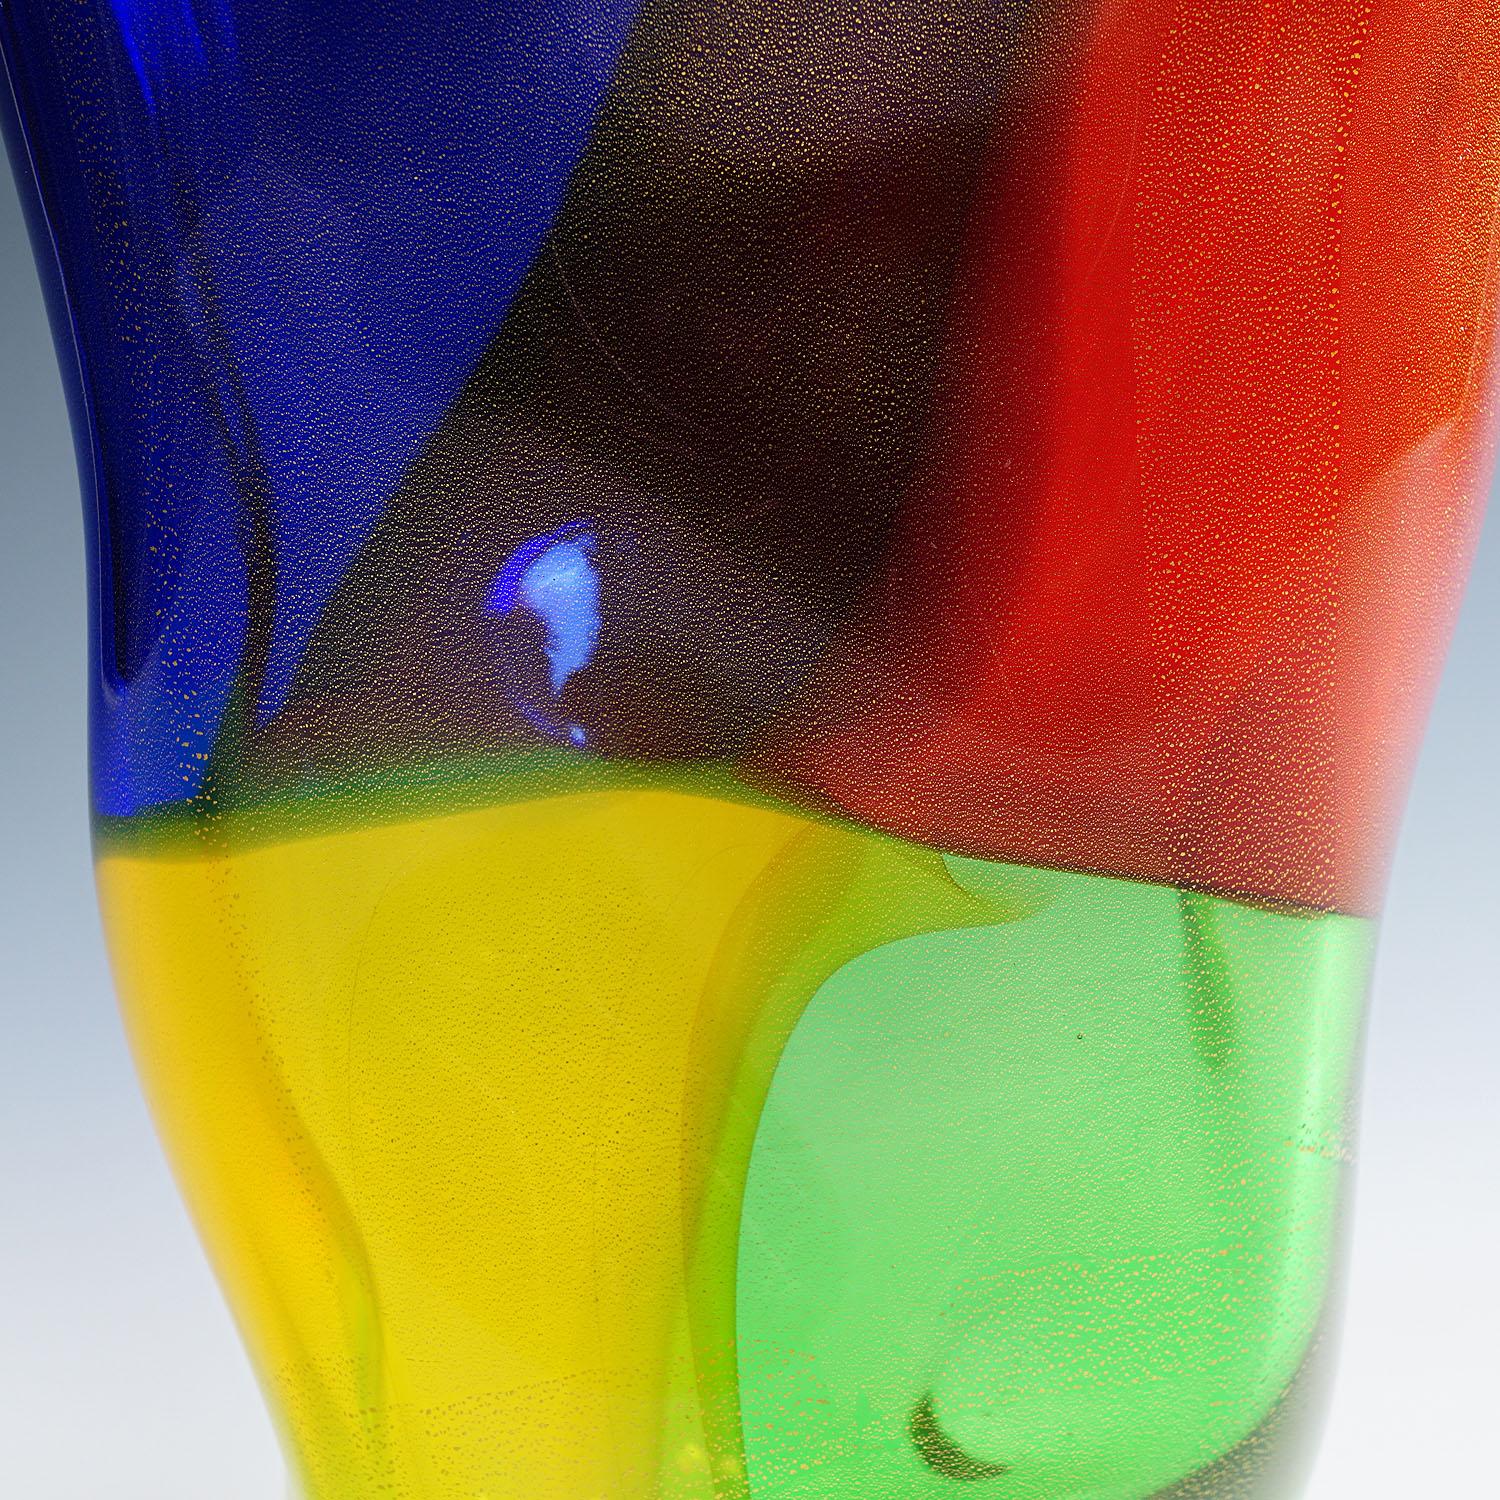 Vintage Art Glass Vase of the 4 Quarti Series by Seguso Viro For Sale 1